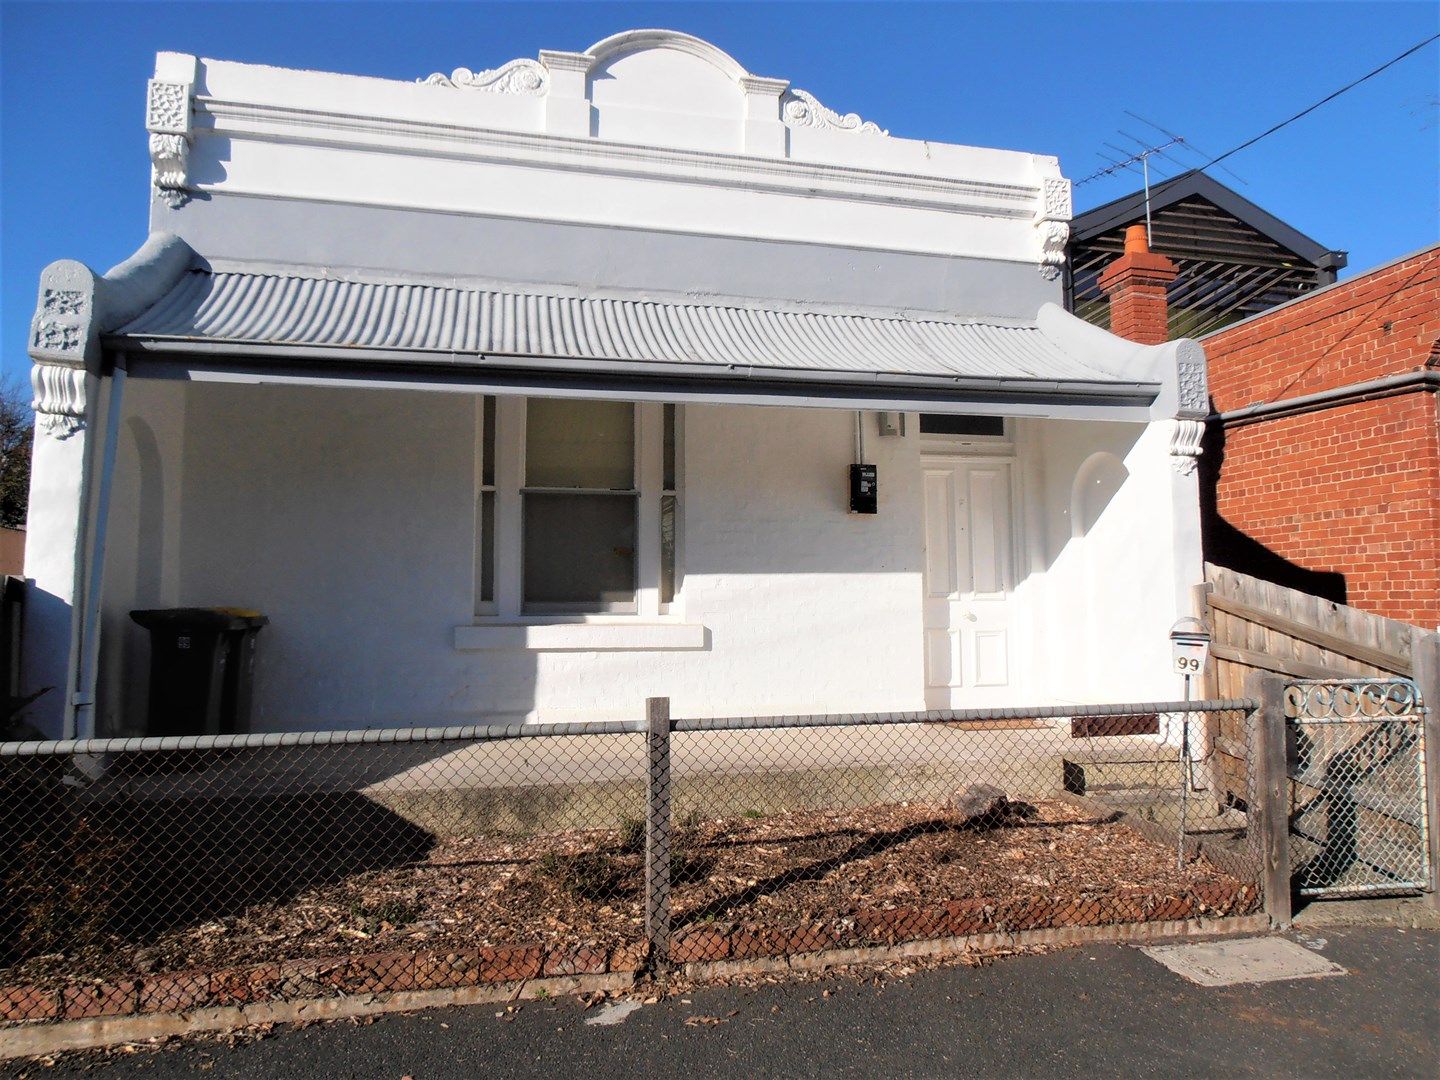 2 bedrooms House in 99 Ogrady Street CLIFTON HILL VIC, 3068